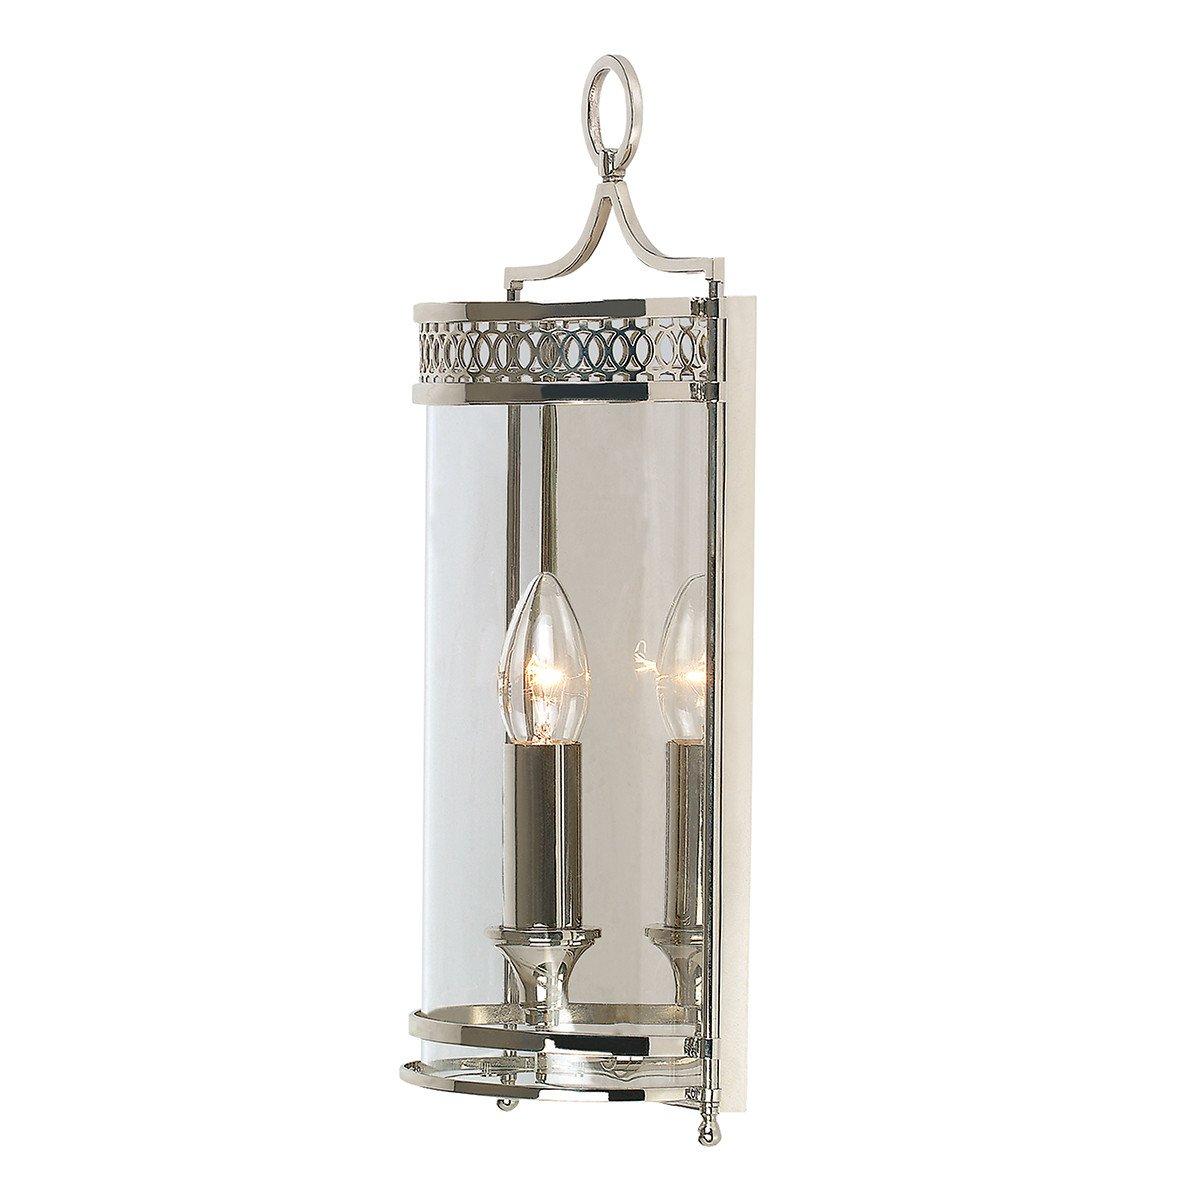 Guildhall 1 Light Indoor Candle Wall Light Polished Nickel E14